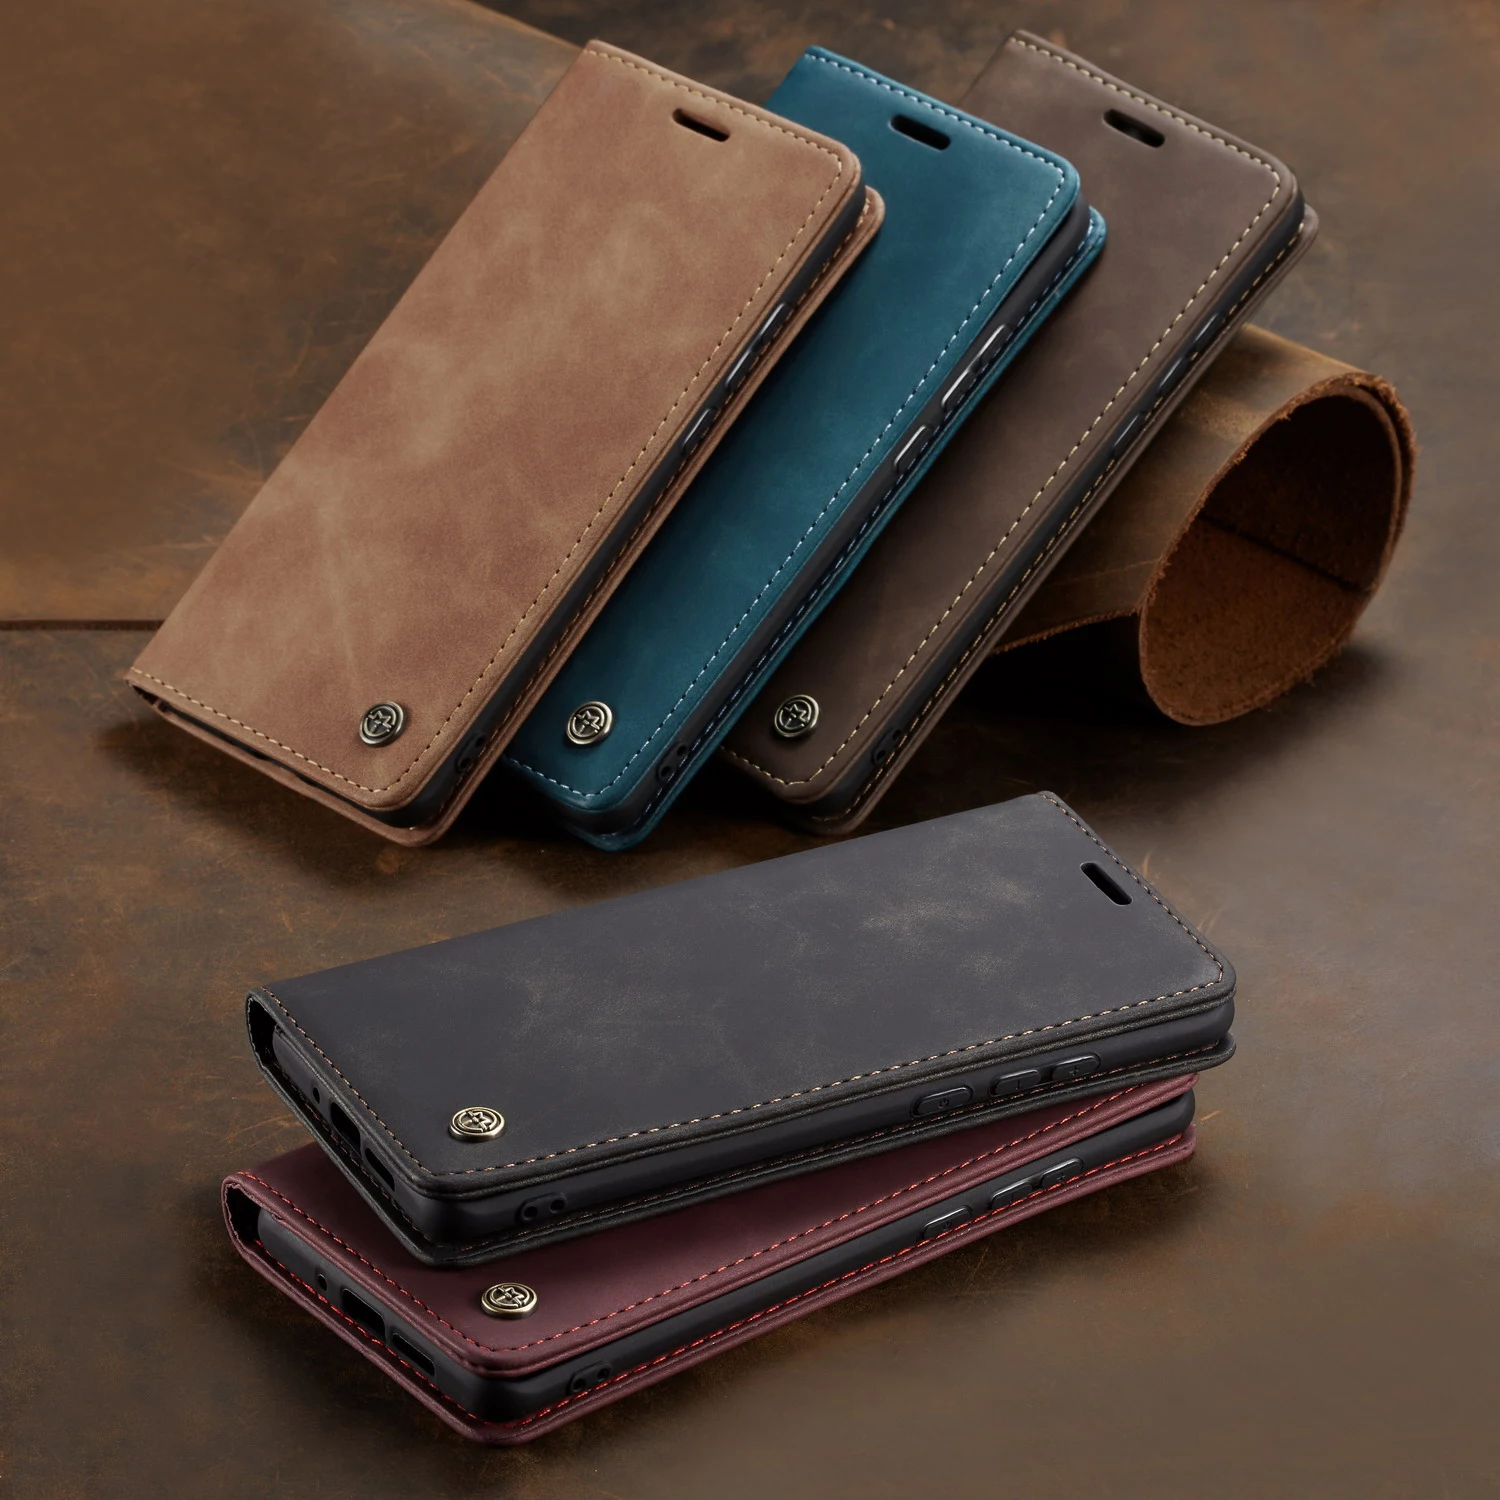 

CaseMe Luxury Leather Magnetic Flip Wallet Case For OnePlus for 1+ 7 8 Pro Stand Card Slot Phone Case for One Plus 8 Pro cover